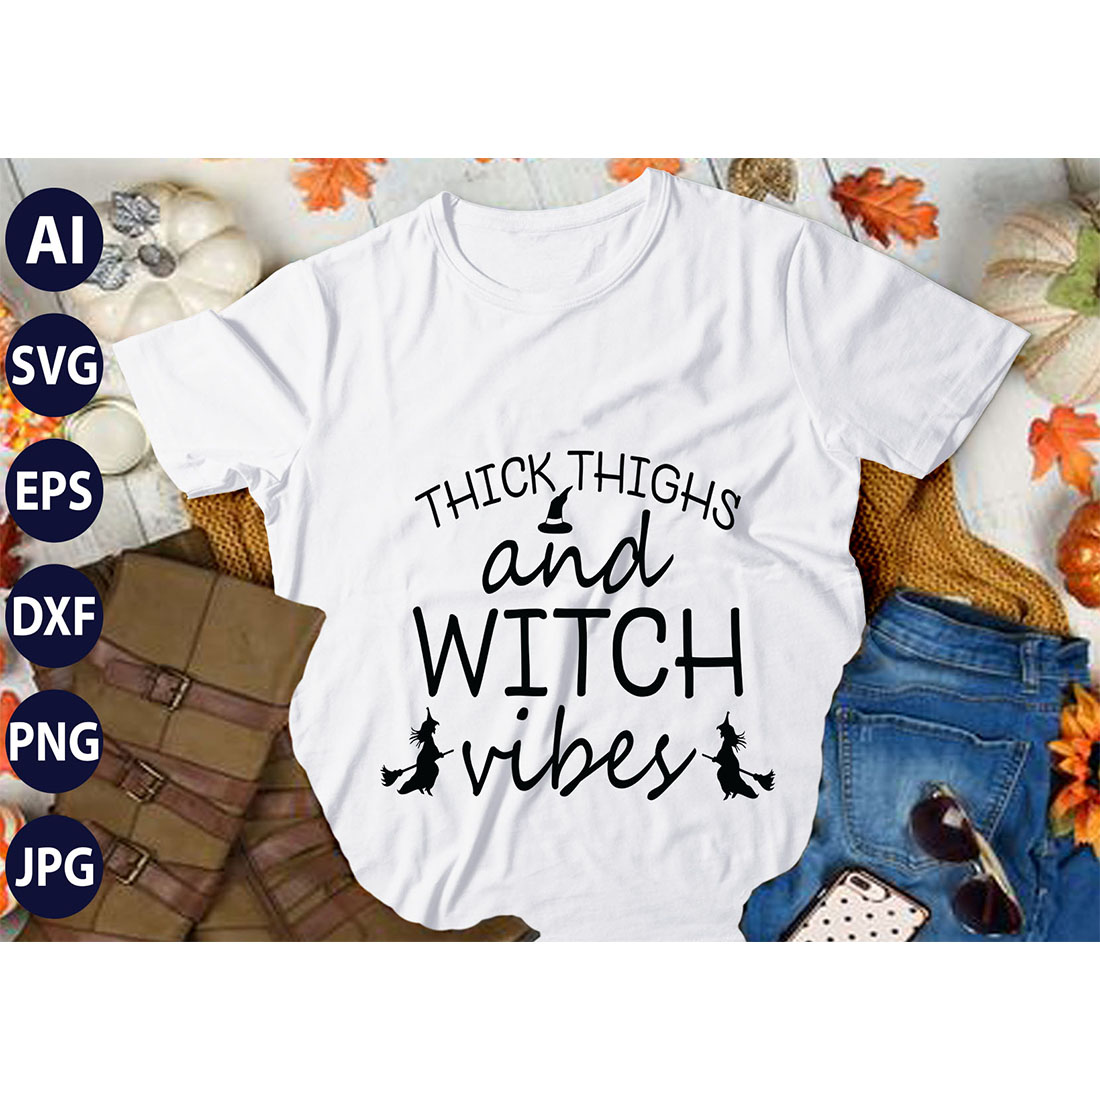 Thick Thighs And Witch Vibes, SVG T-Shirt Design |Happy Halloween & Pumpkin T-Shirt Design | Ai, Svg, Eps, Dxf, Jpeg, Png, Instant download T-Shirt | 100% print-ready Digital vector file preview image.